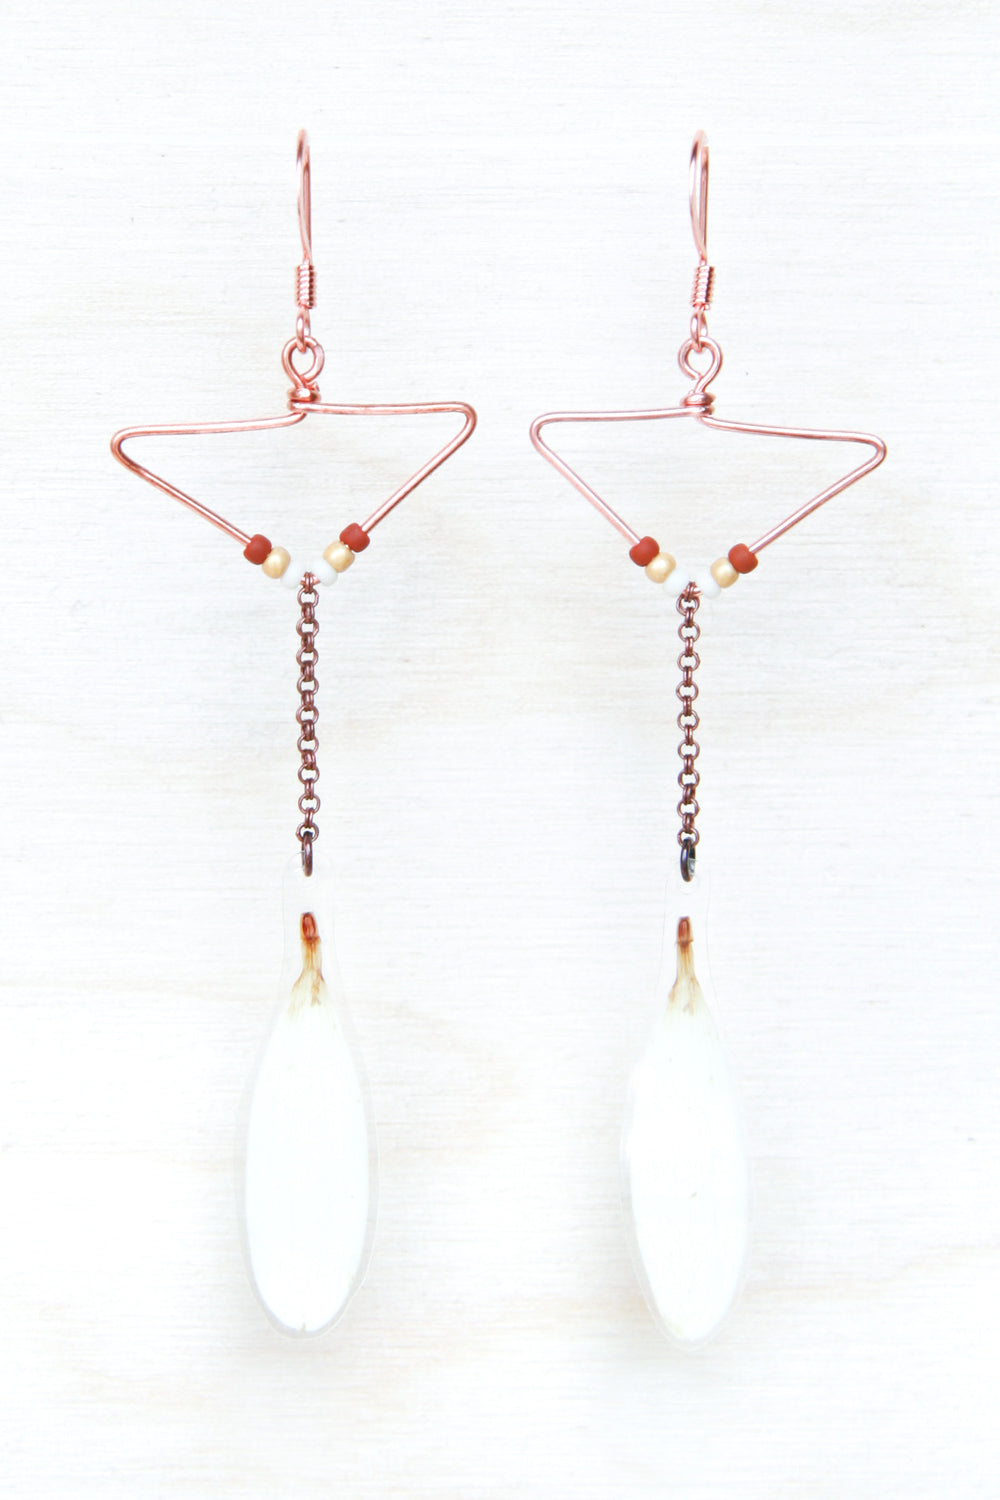 White Shasta Daisy Petal Earrings with Copper Triangle Hoop & Terracotta Beads